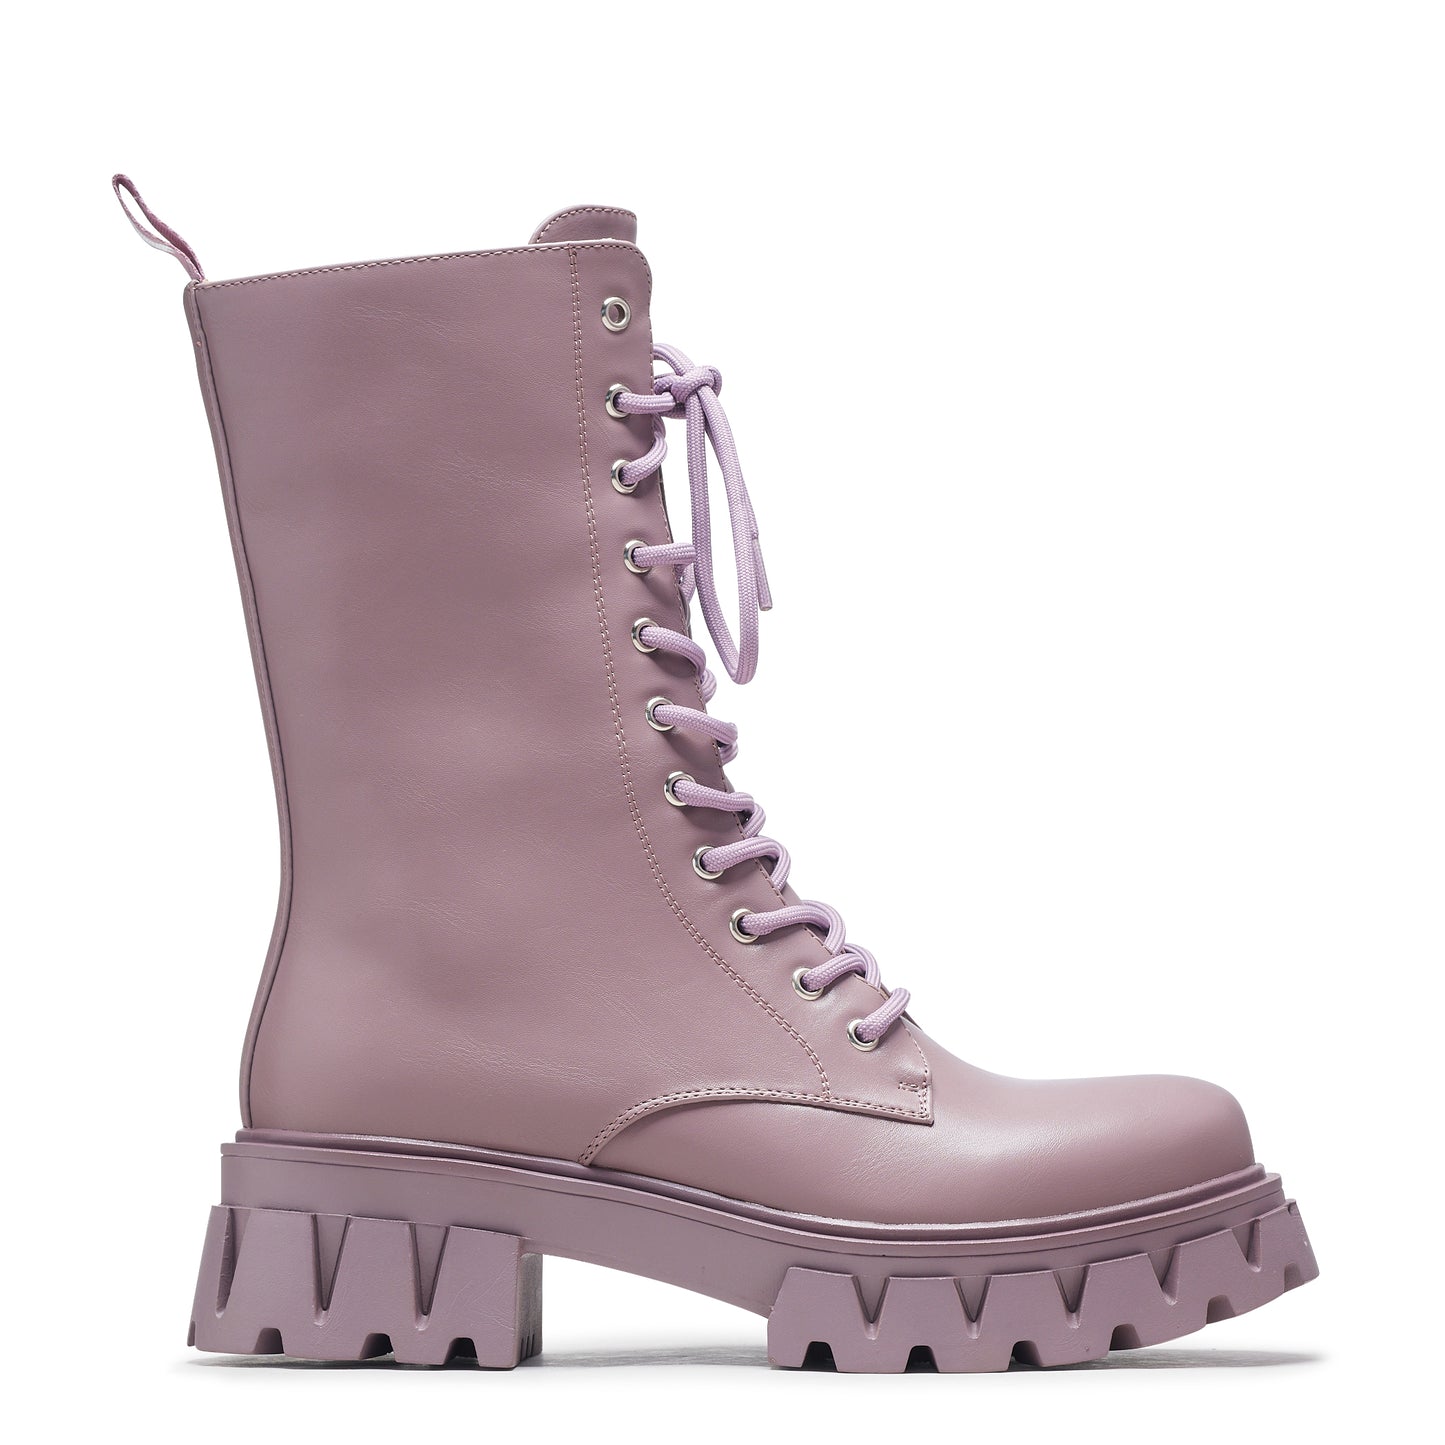 Siren Tall Lace Up Boots - Berry - Ankle Boots - KOI Footwear - Purple - Side View